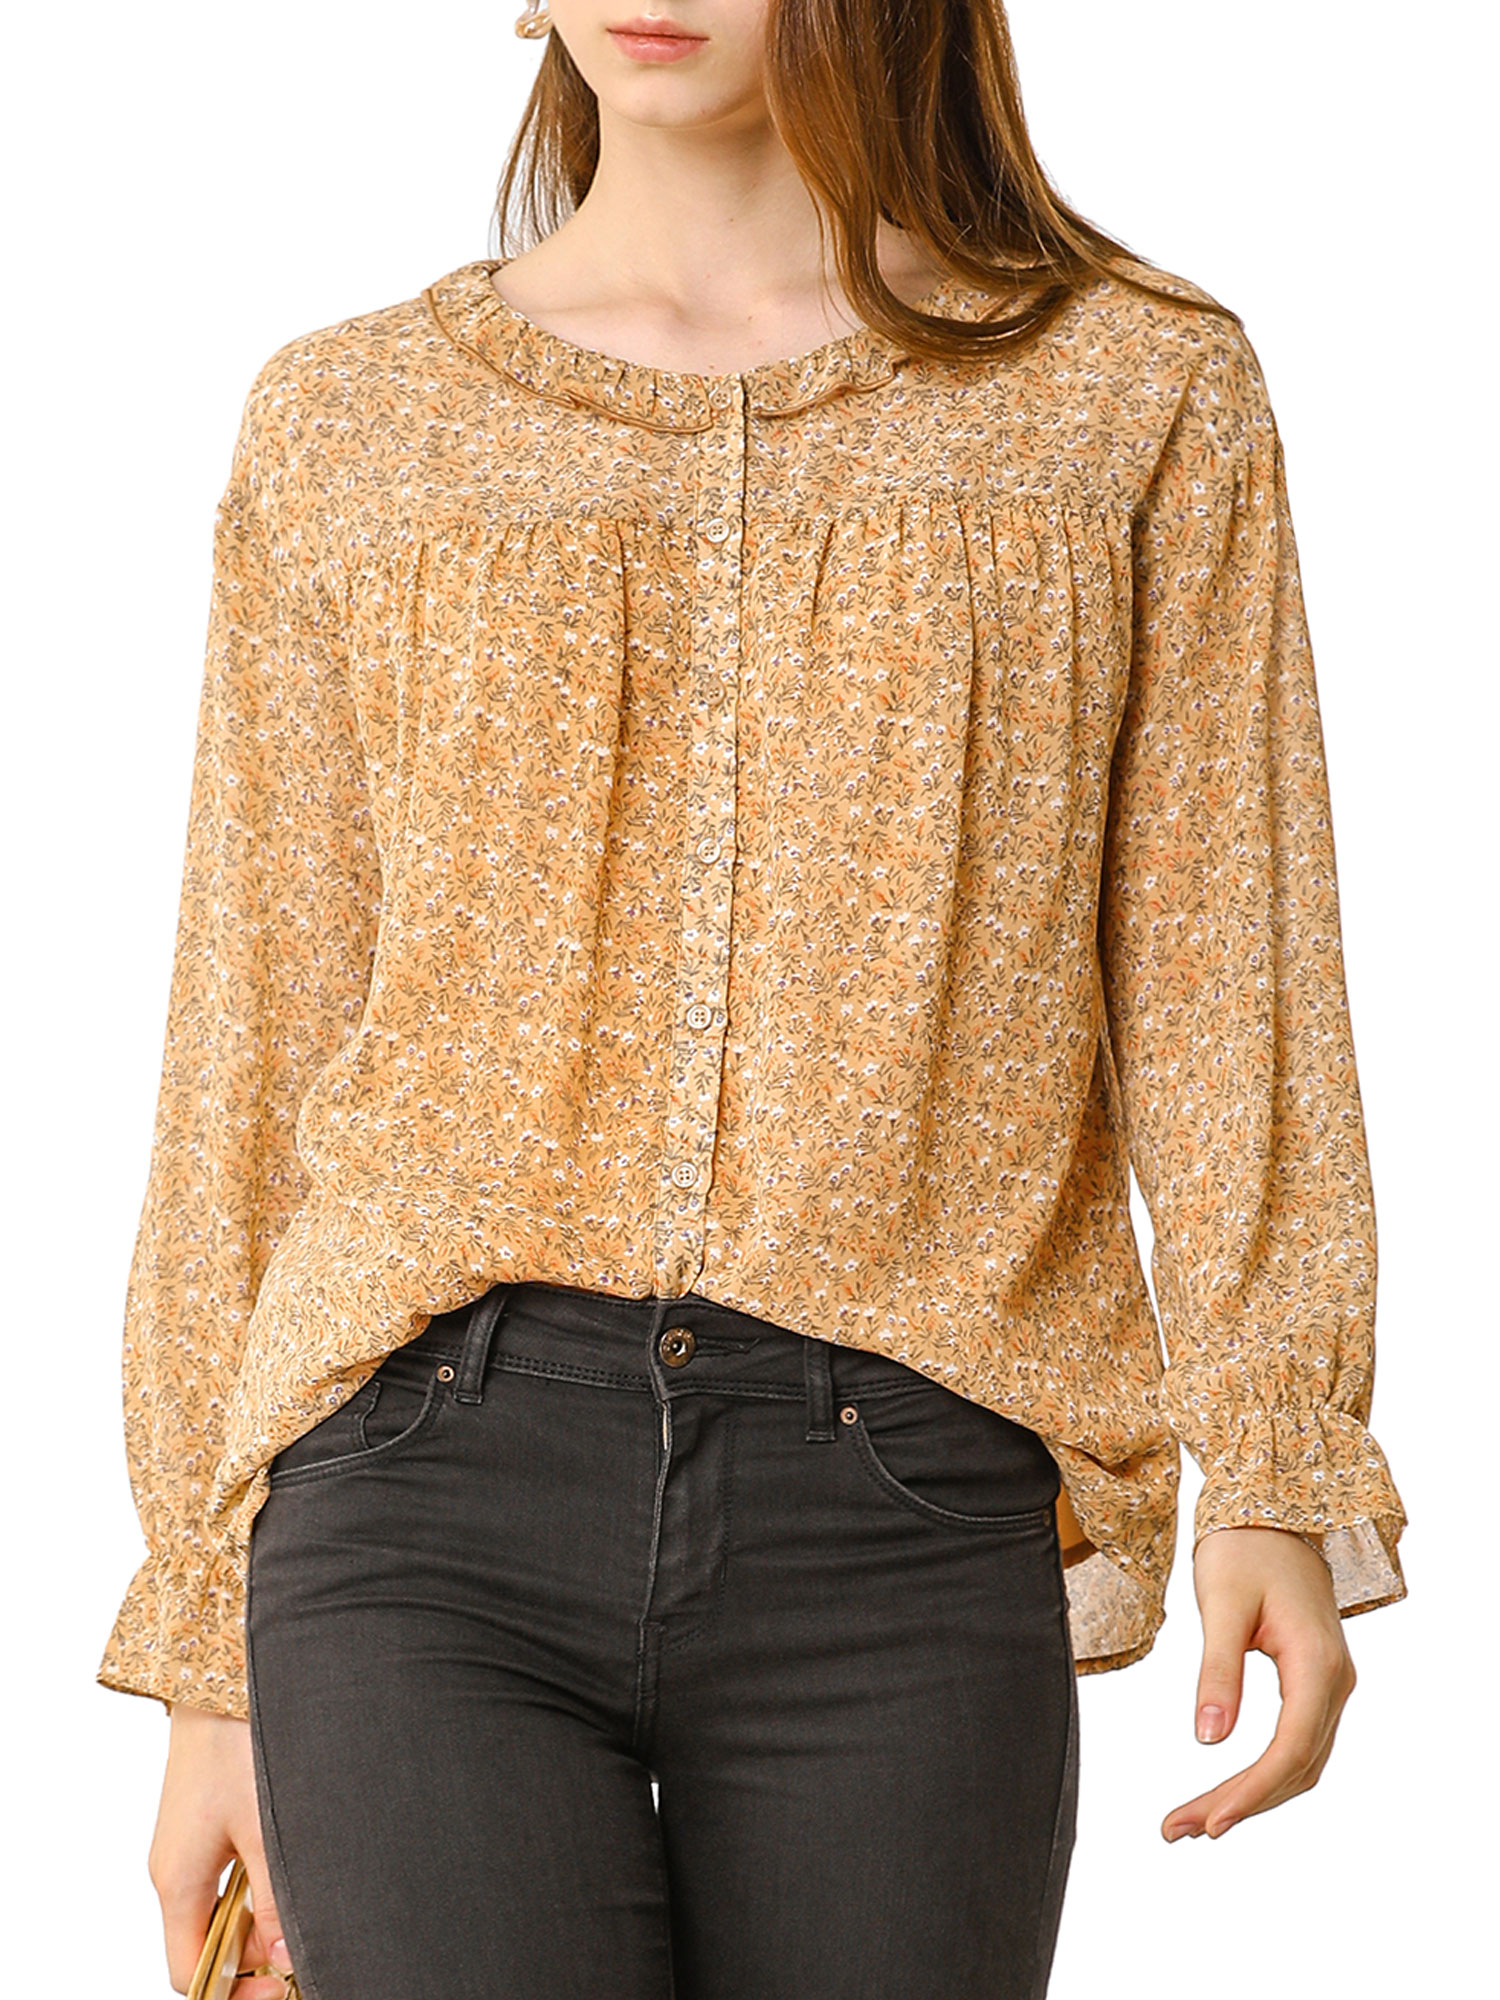 MODA NOVA Junior's Ditsy Floral Button up Long Sleeve Blouse Yellow XS - image 5 of 5